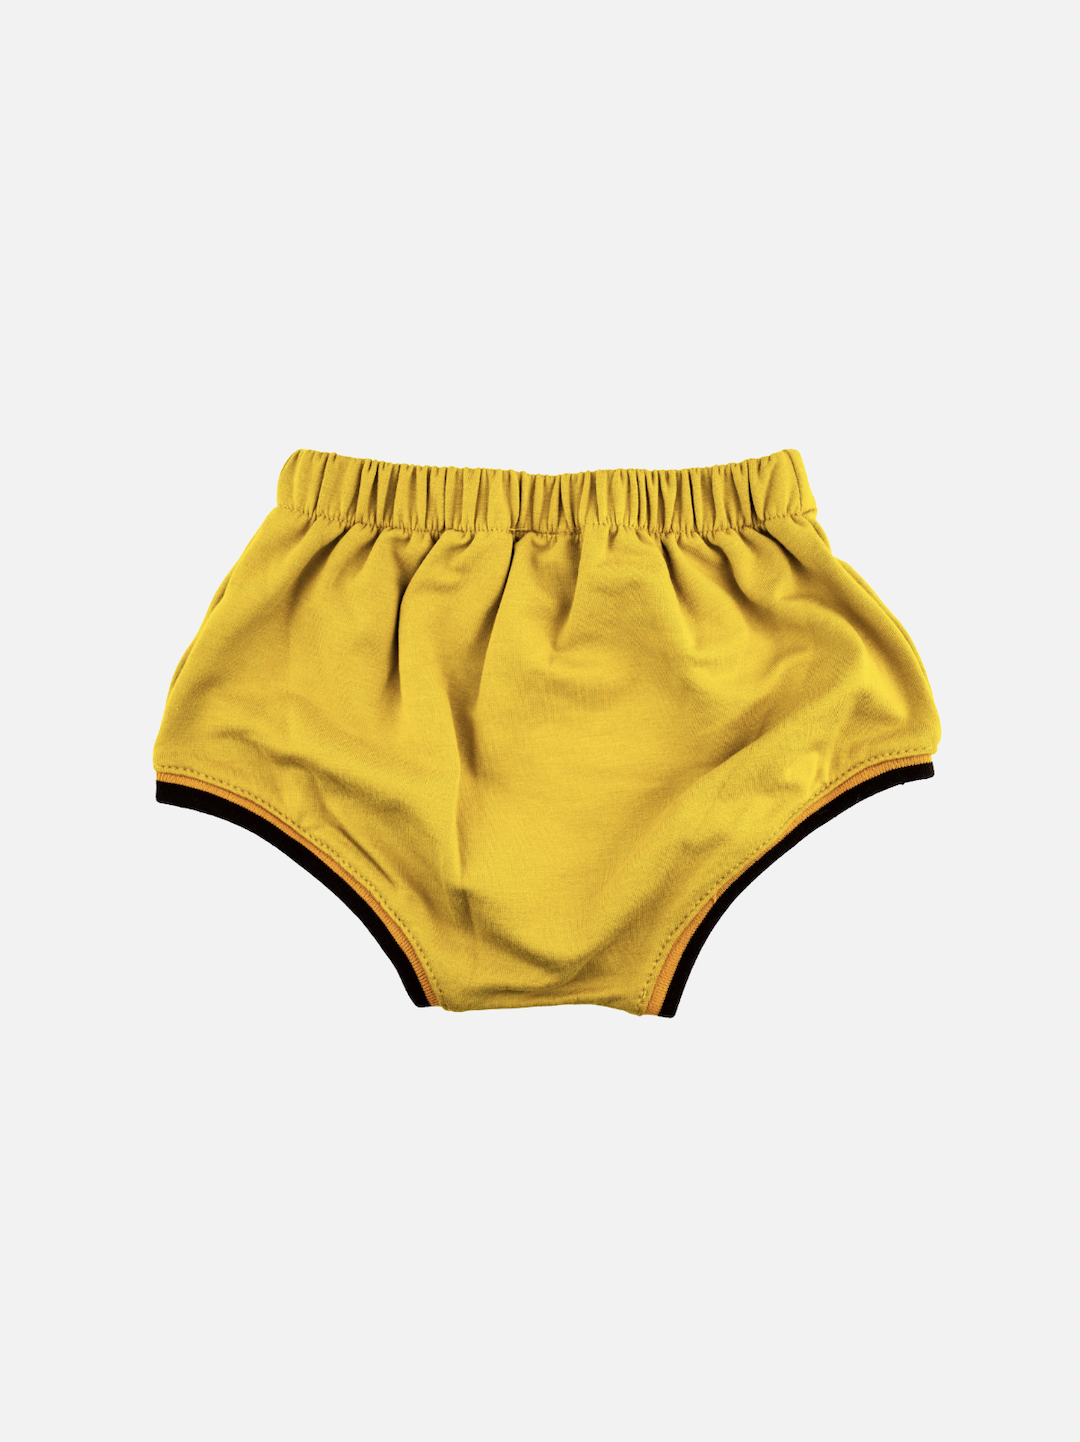 Sunshine yellow kids' bloomers with black trim at leg holes, back view